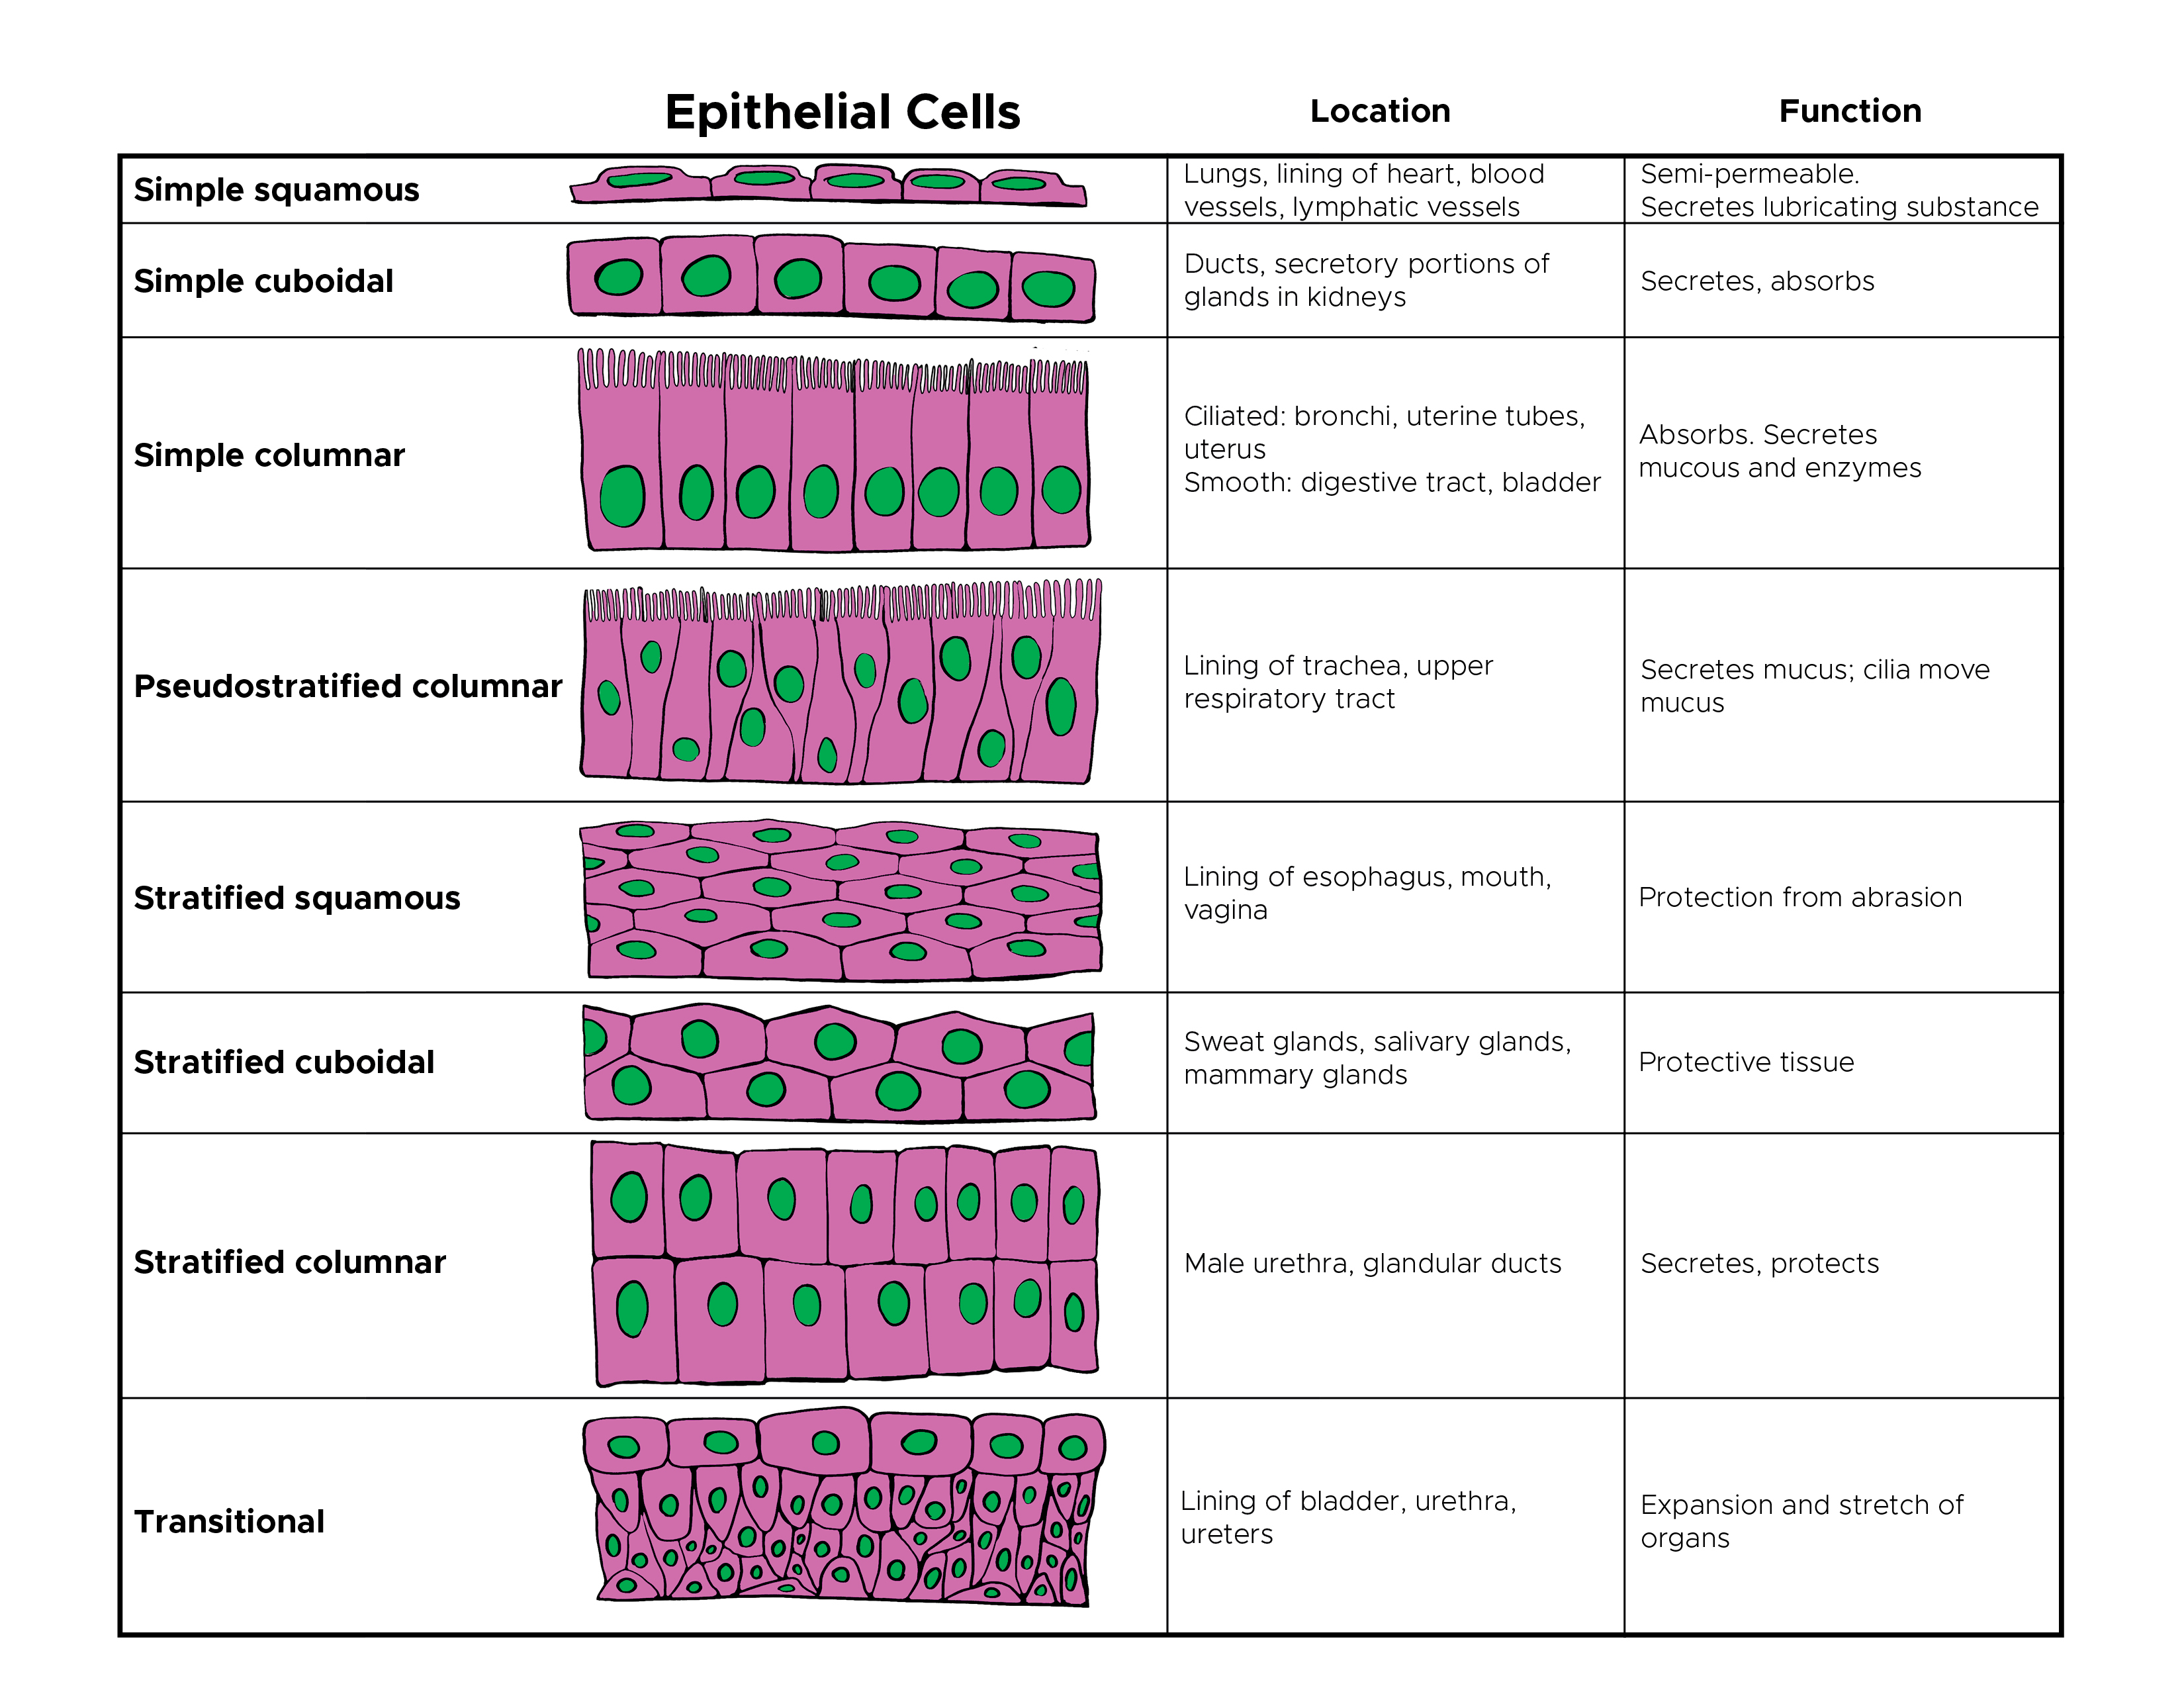 Chart depicting various types of epithelial cells and location in the body